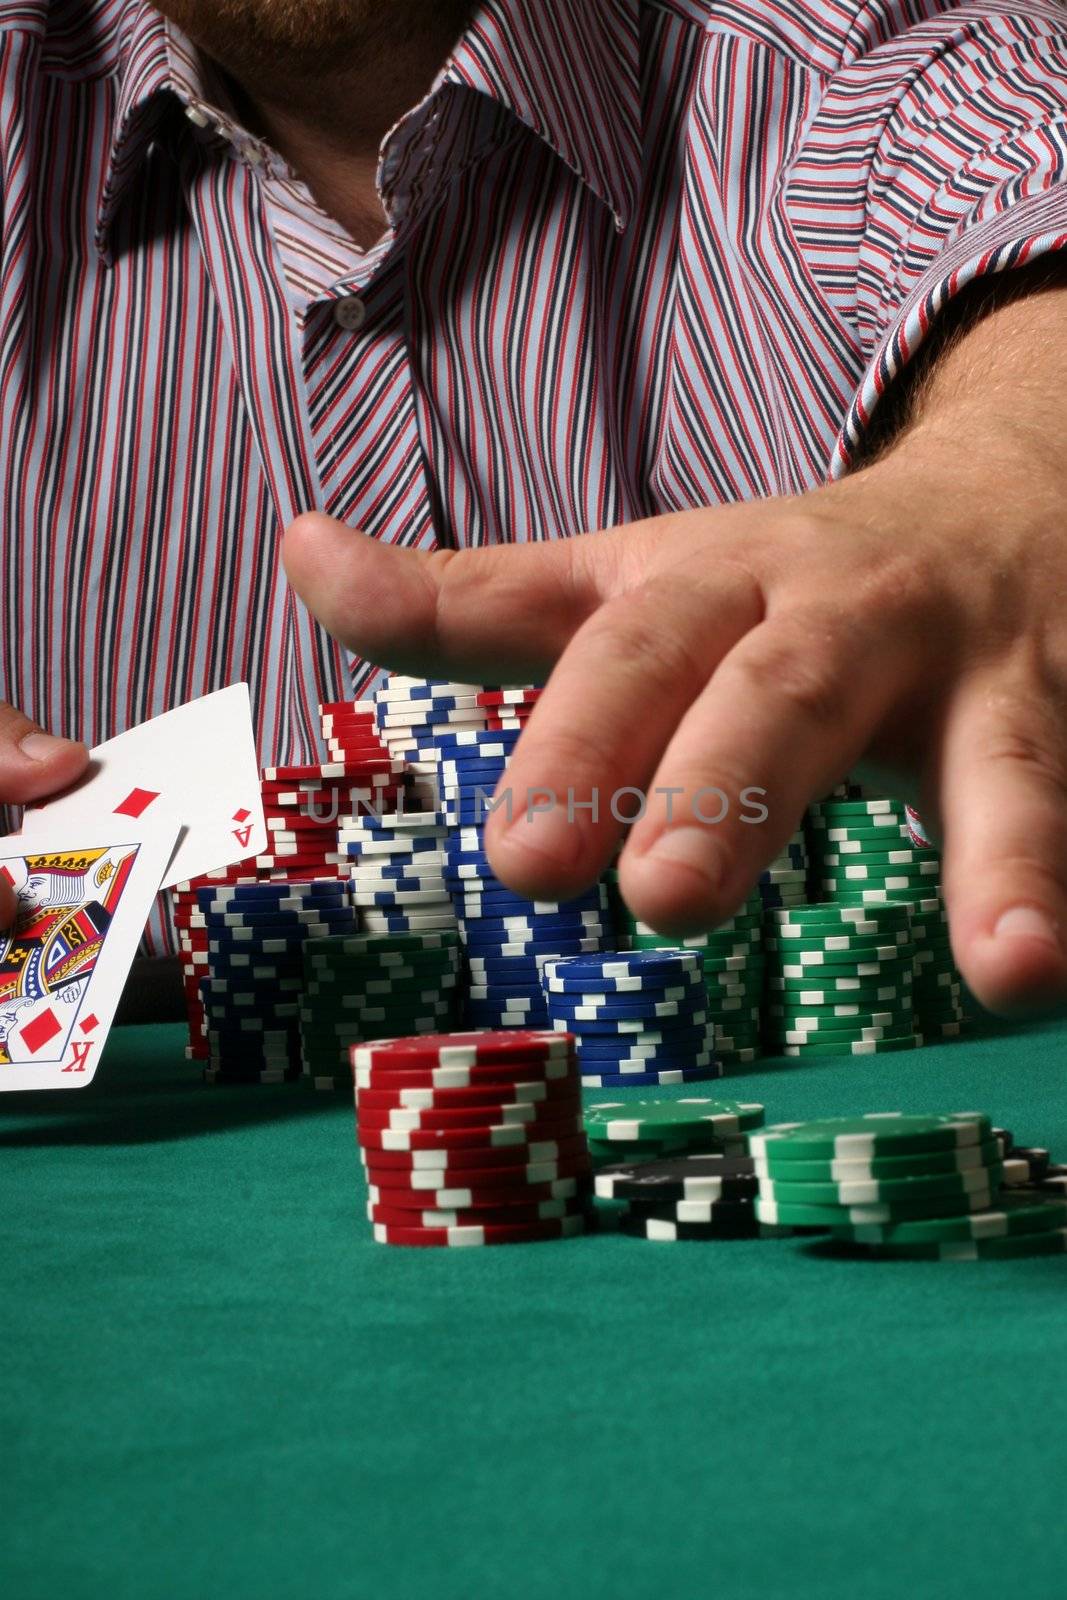 Confident poker player showing big slick and grabbing the pot